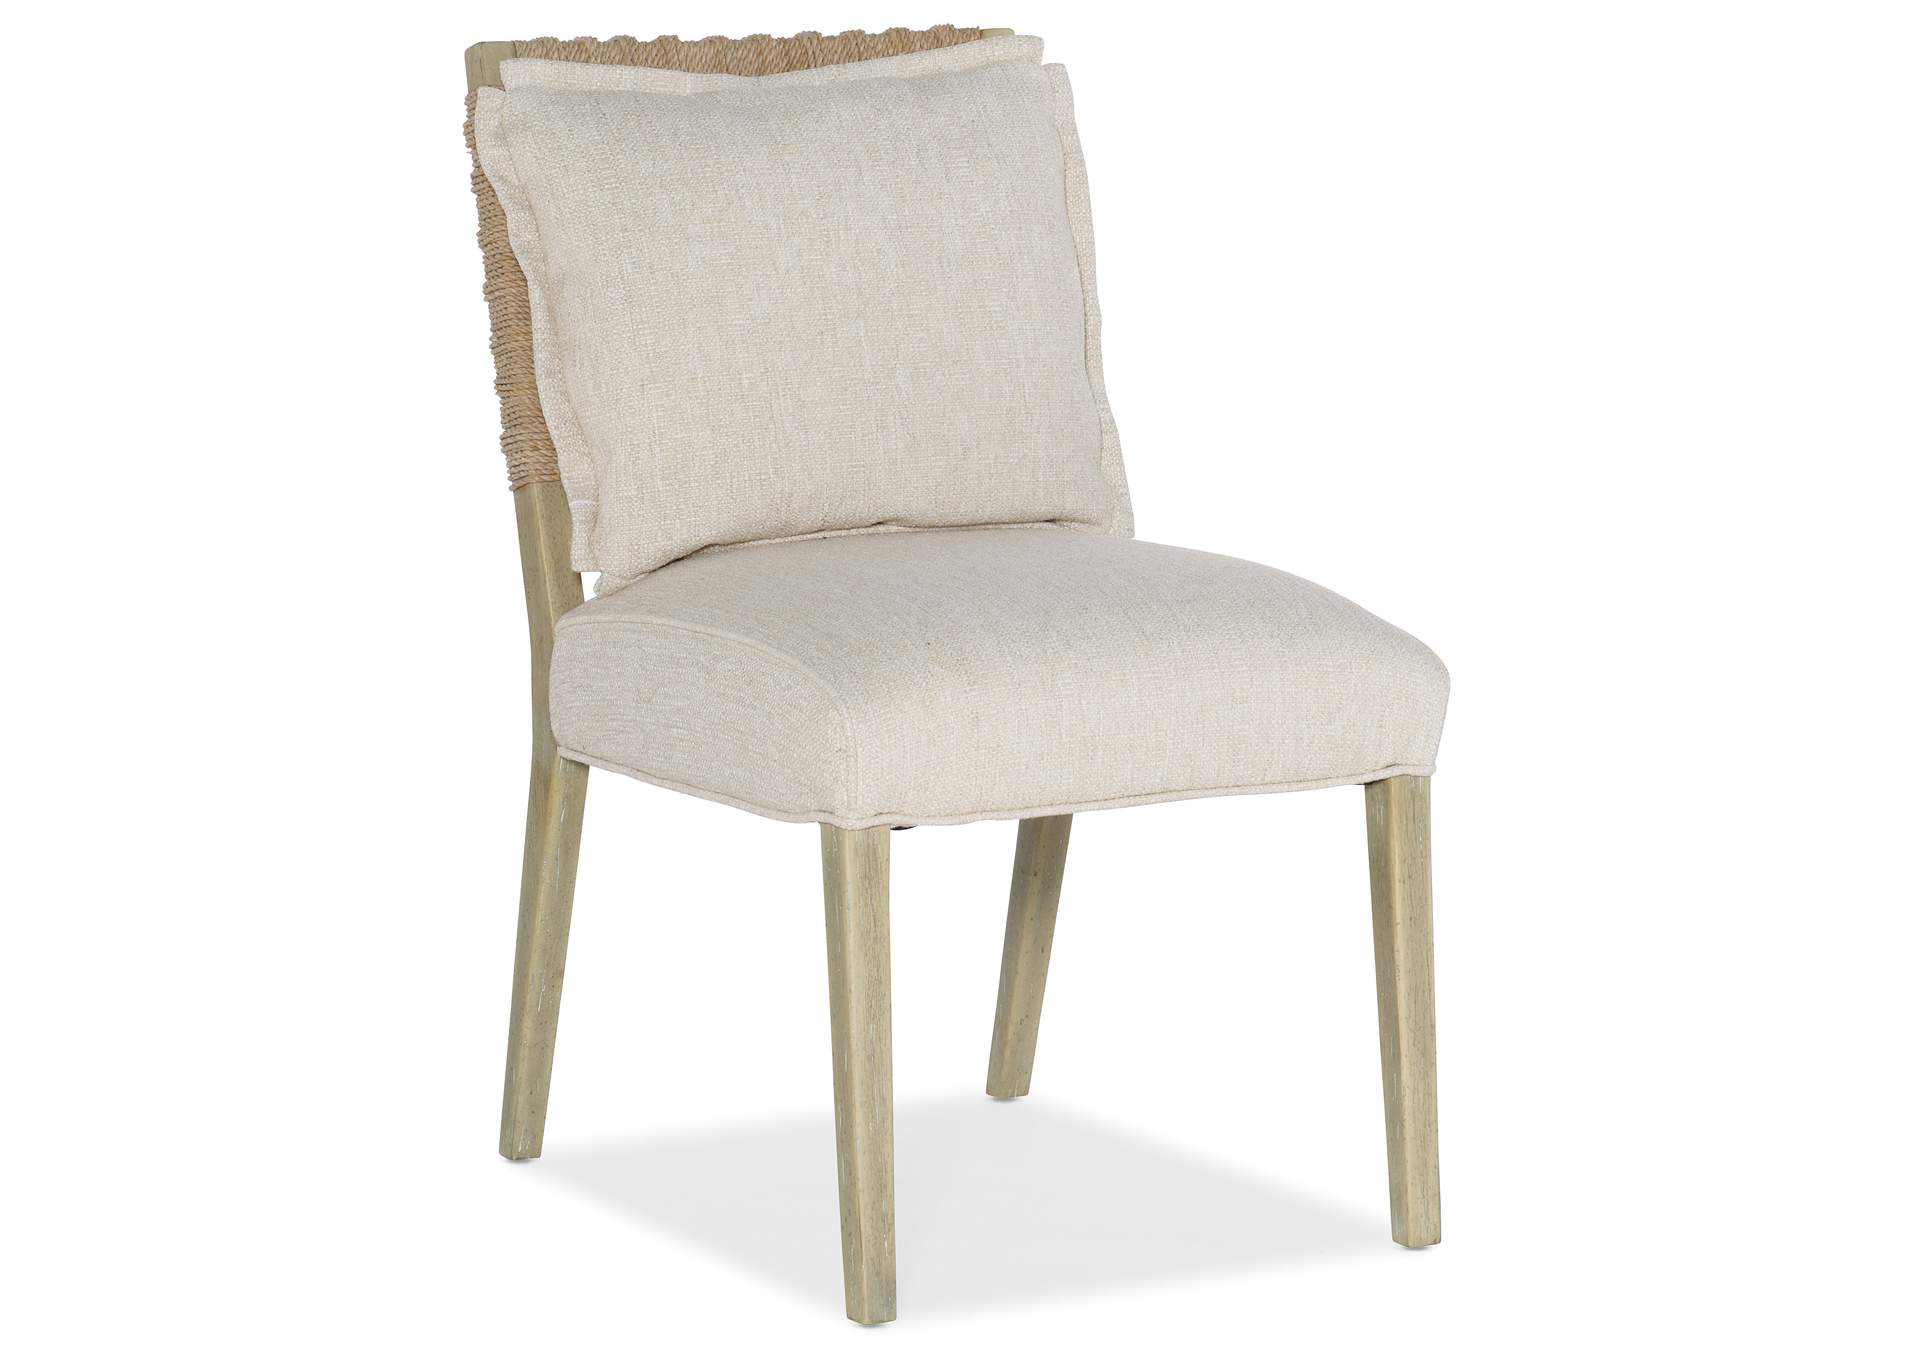 Surfrider Woven Back Side Chair - 2 Per Ctn - Price Ea